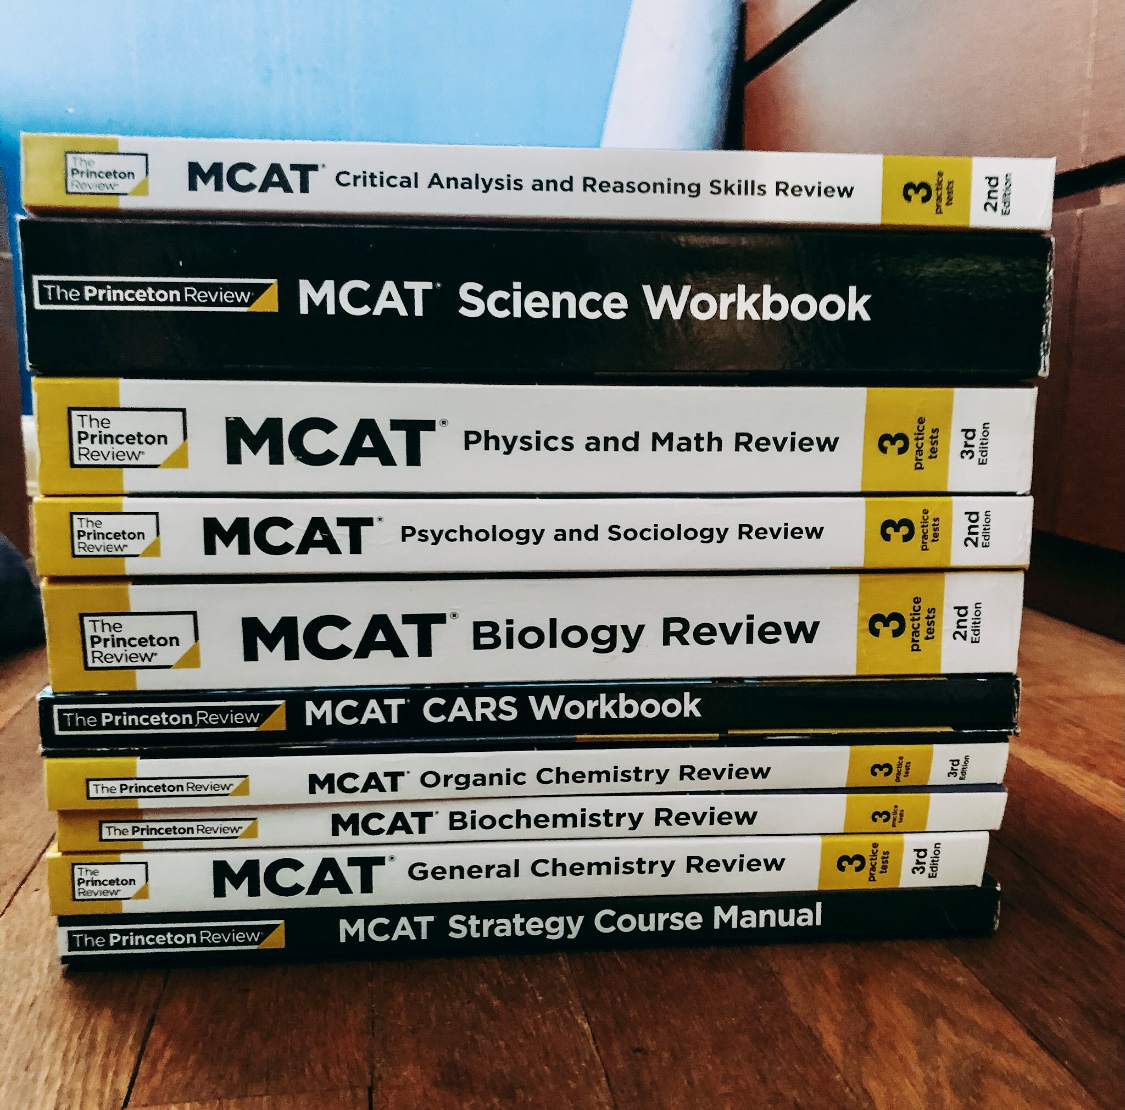 All About the MCAT: How I Studied, My Score, and What I’d Do Differently Today.